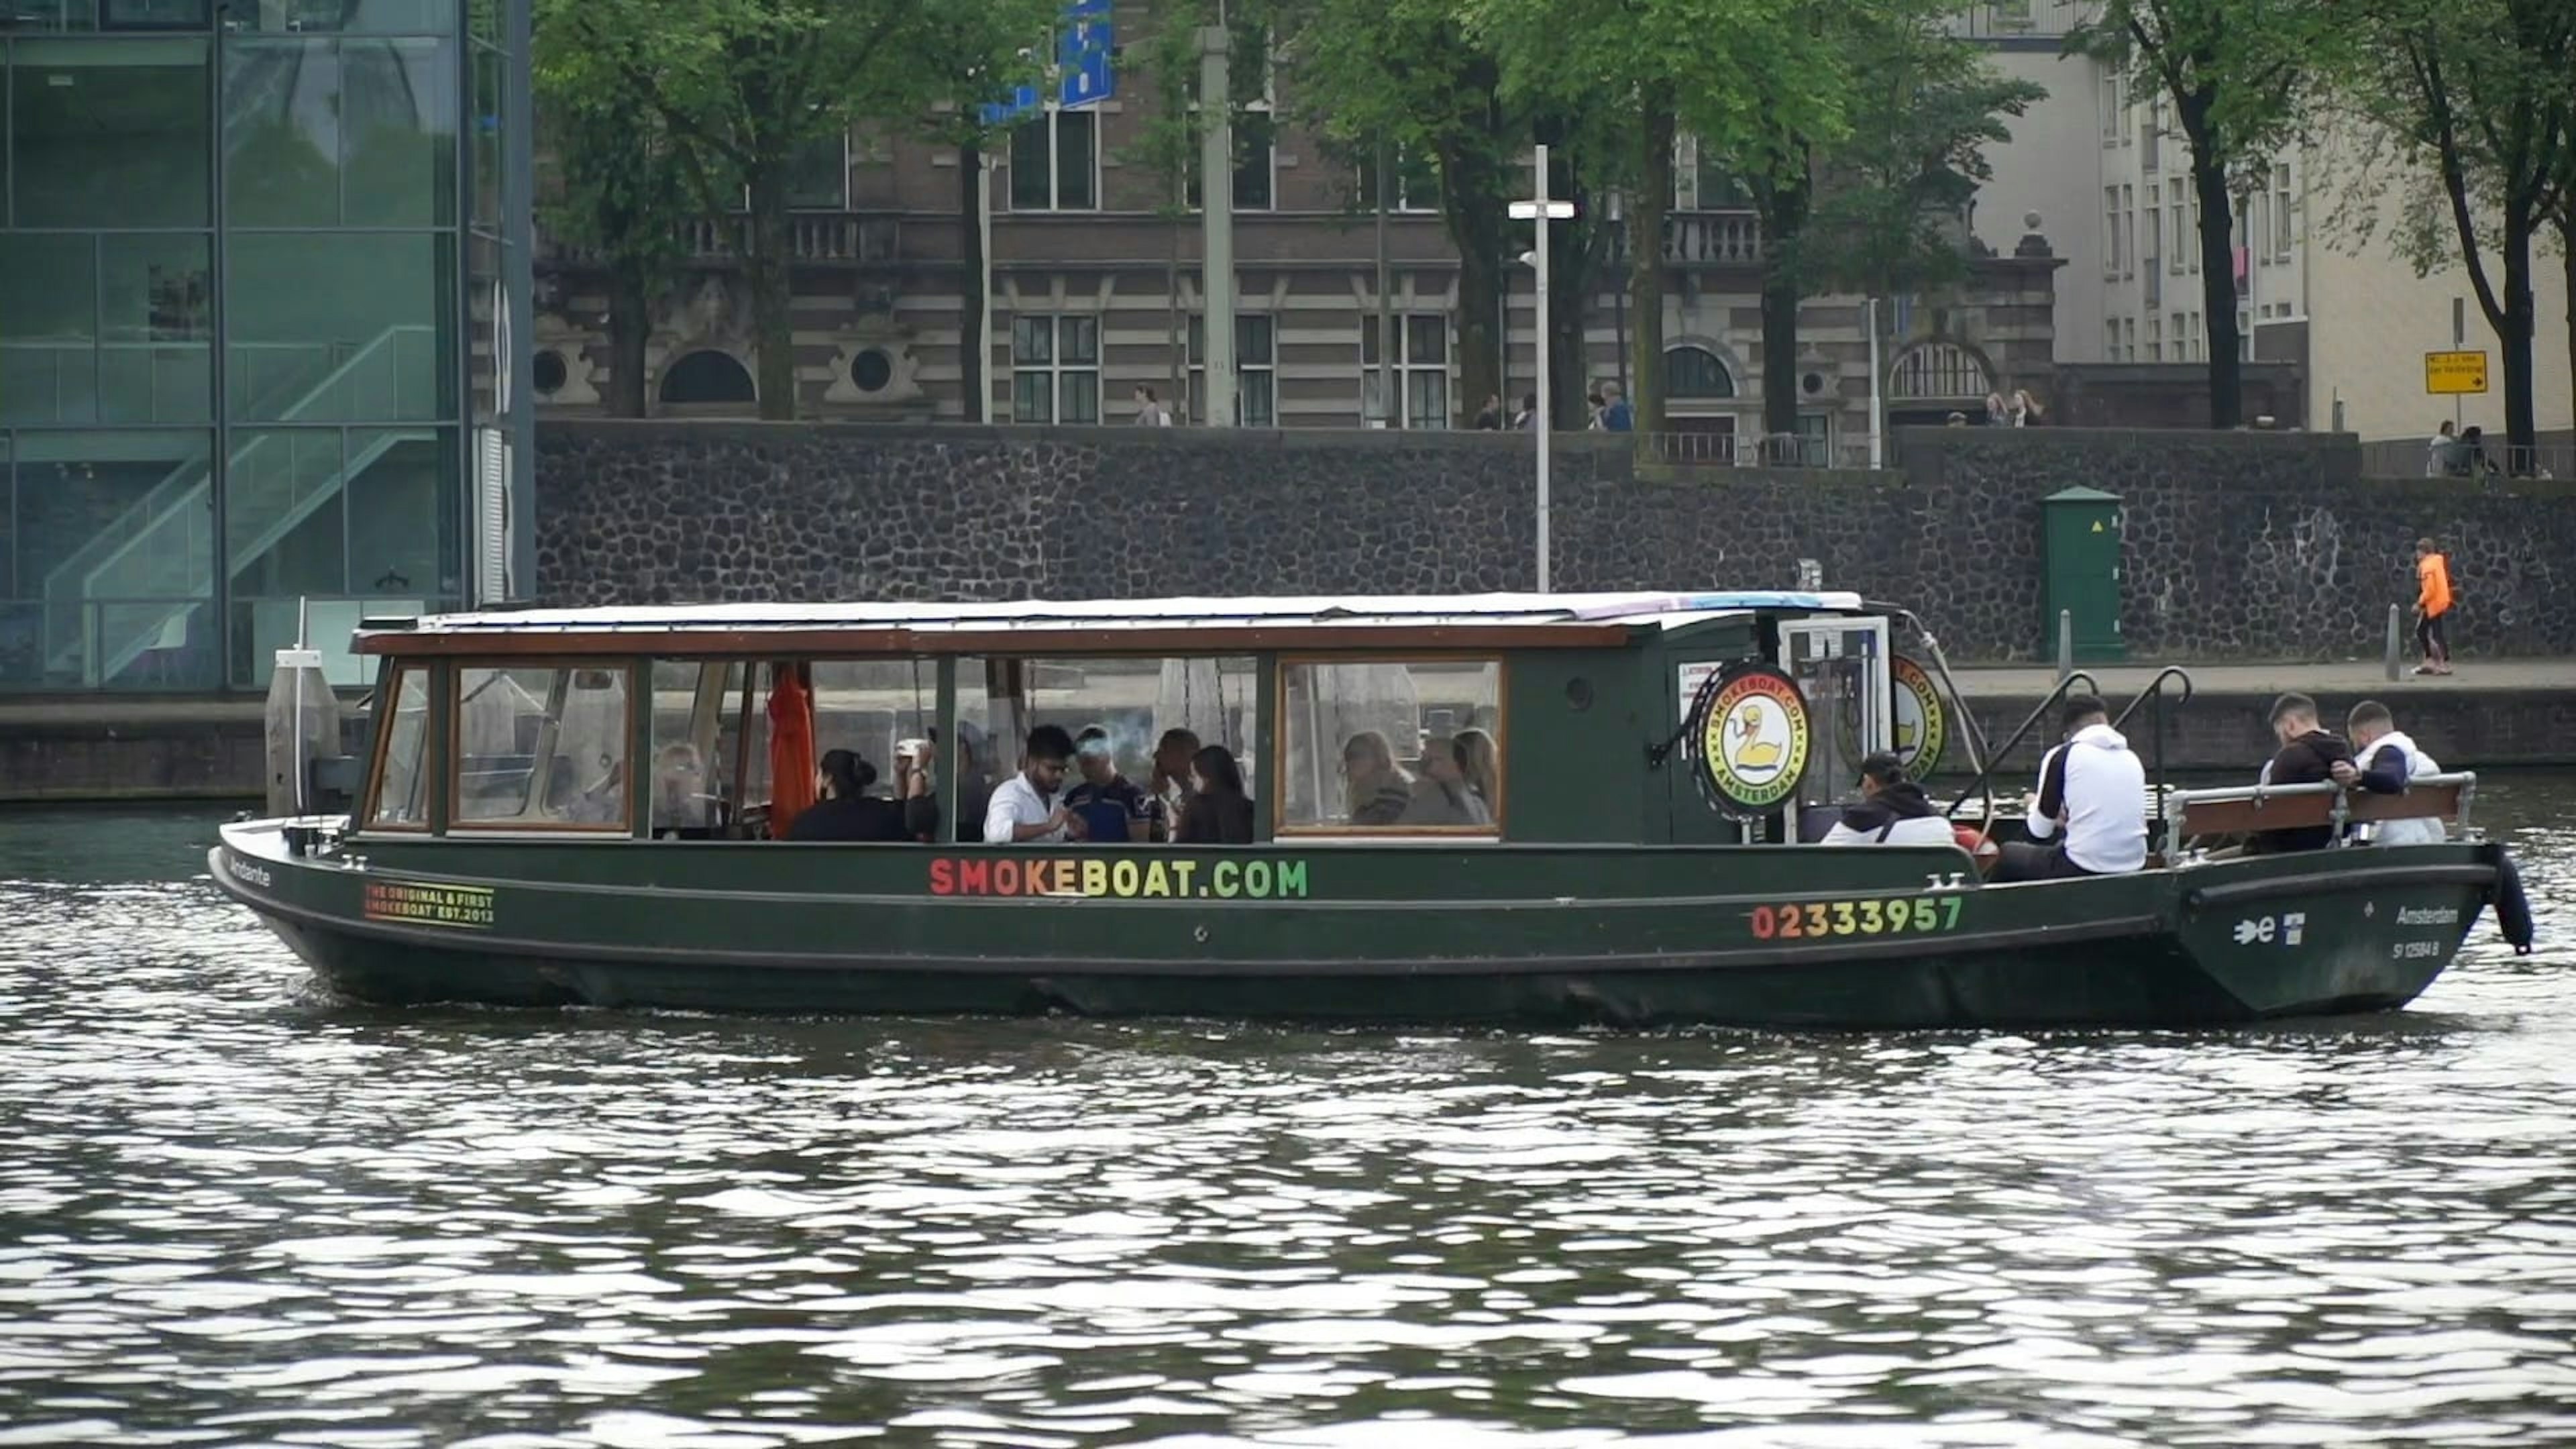 Smoking-on-a-boat-in-Amsterdam